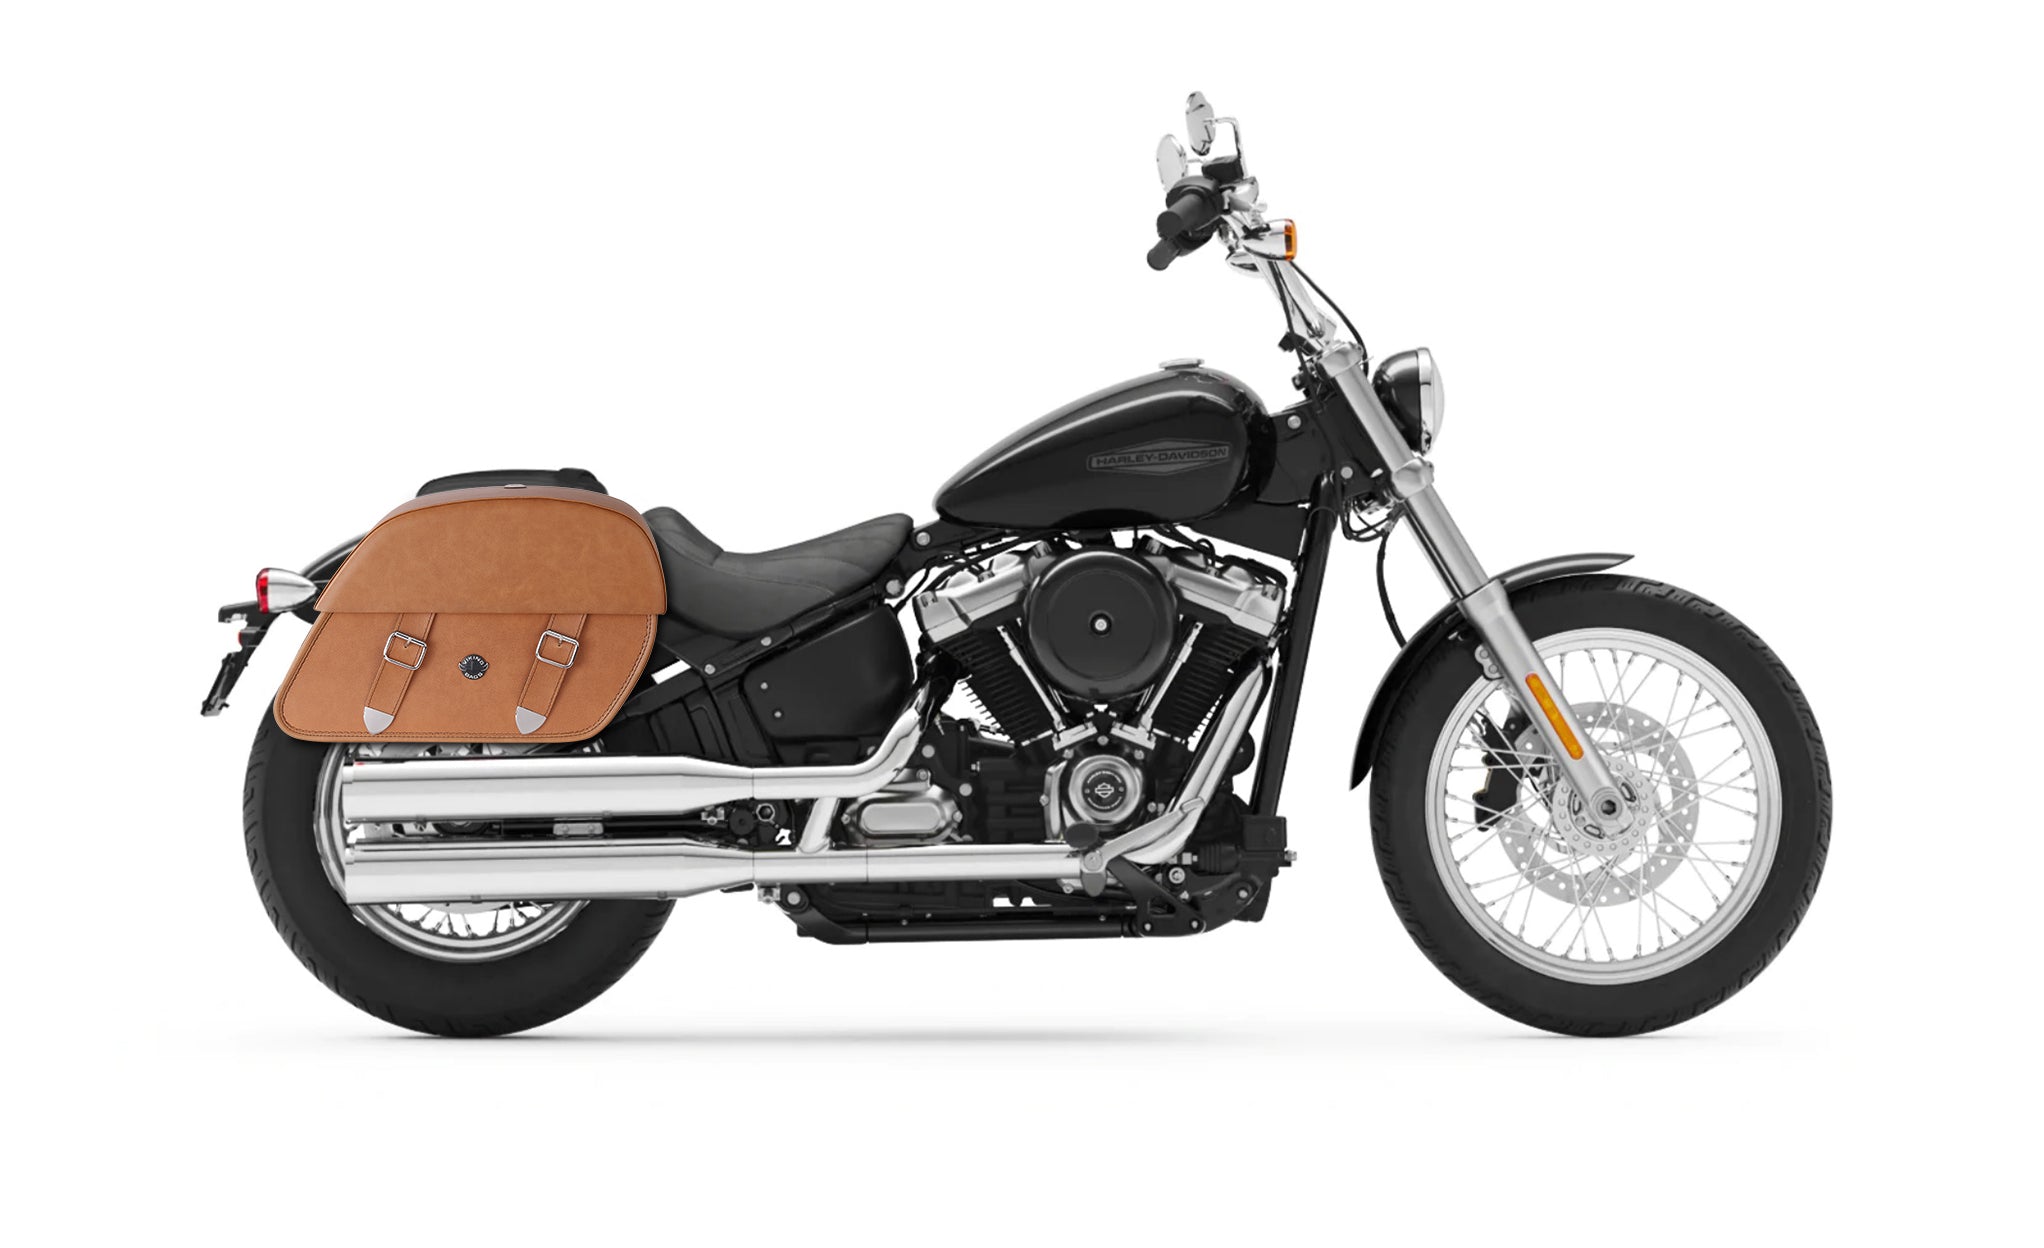 33L - Baelor Brown Large Leather Saddlebags For Harley Softail Standard FXST @expand